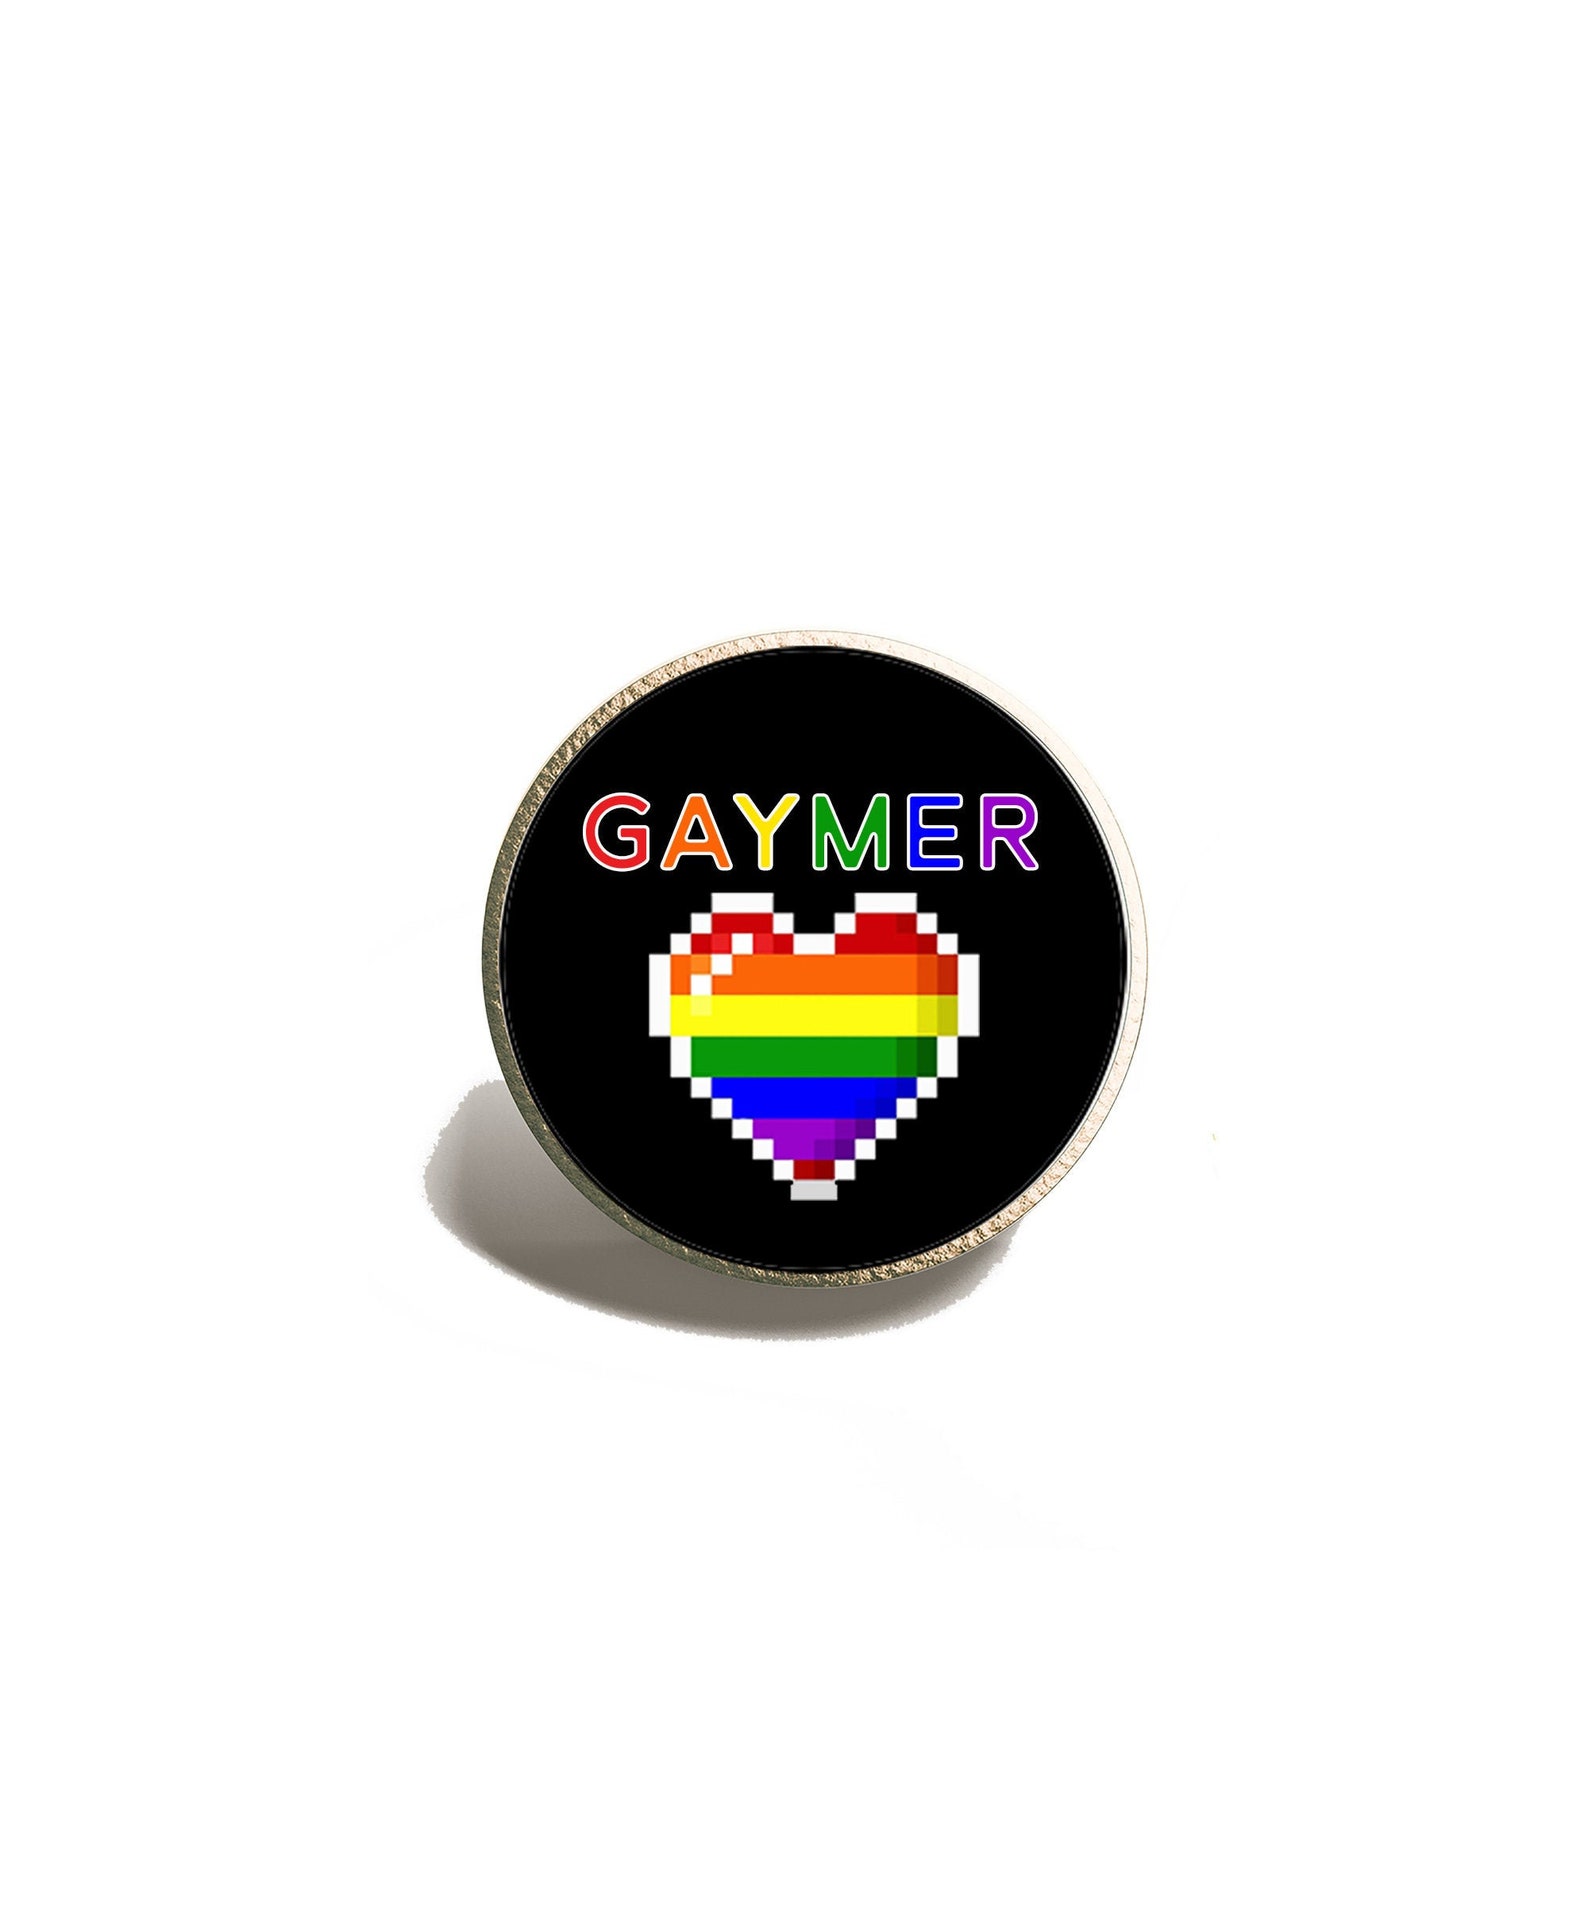 Gaymer Pin Badge Lapel Pin Gifts for Gamers LGBTQ Gifts | Etsy